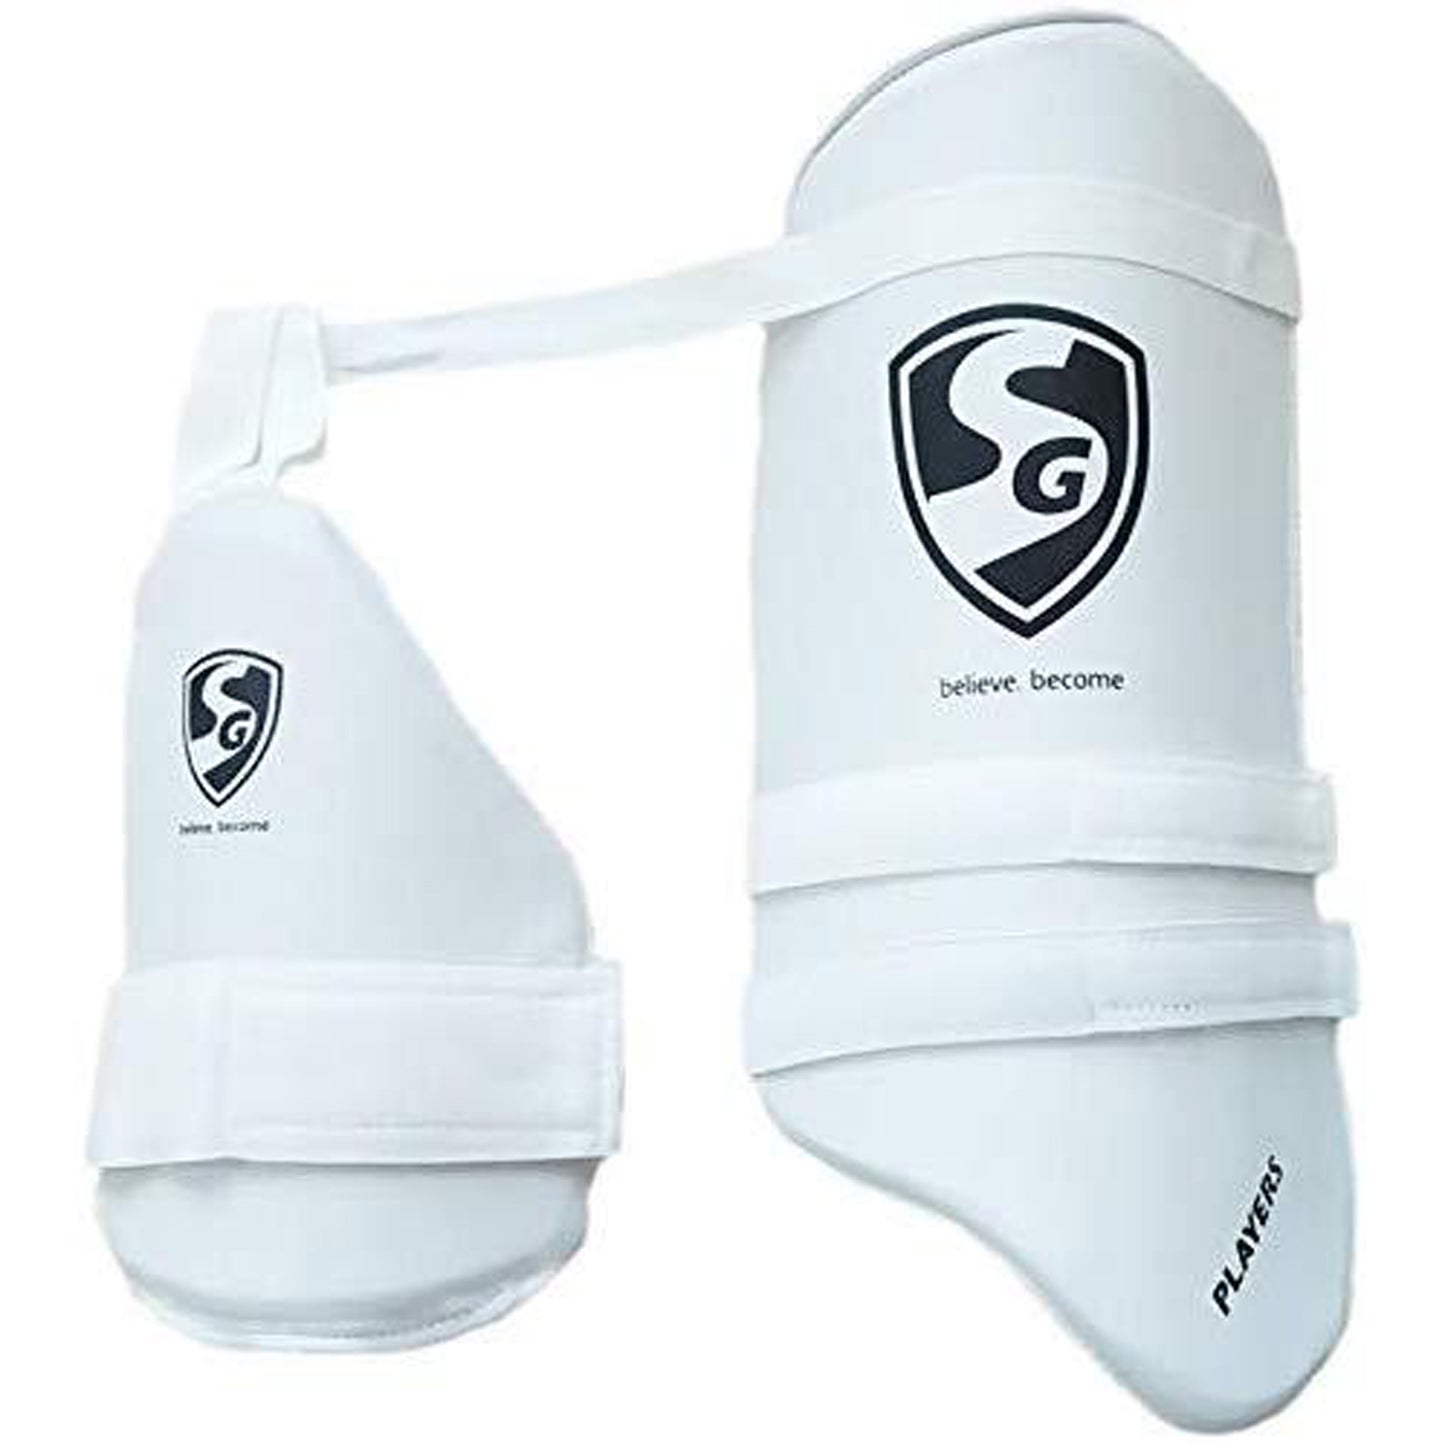 SG Players White Combo Cricket Thigh Pads, Adults - Best Price online Prokicksports.com